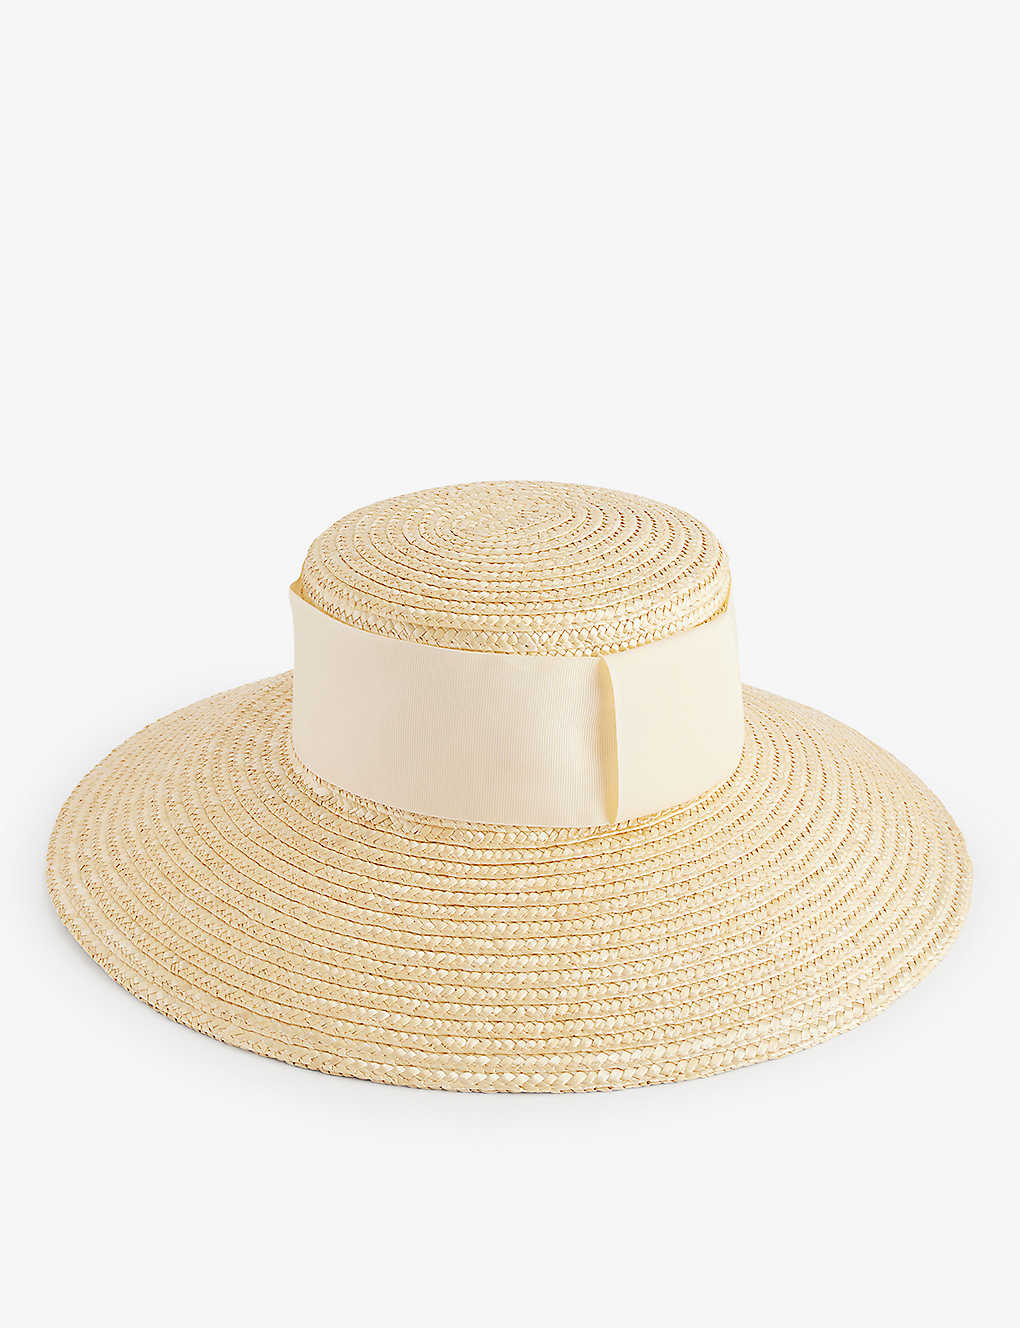 Boutique Bonita Womens Cream With Cream Band Boater Ribbon-embellished Wide-brim Straw Hat